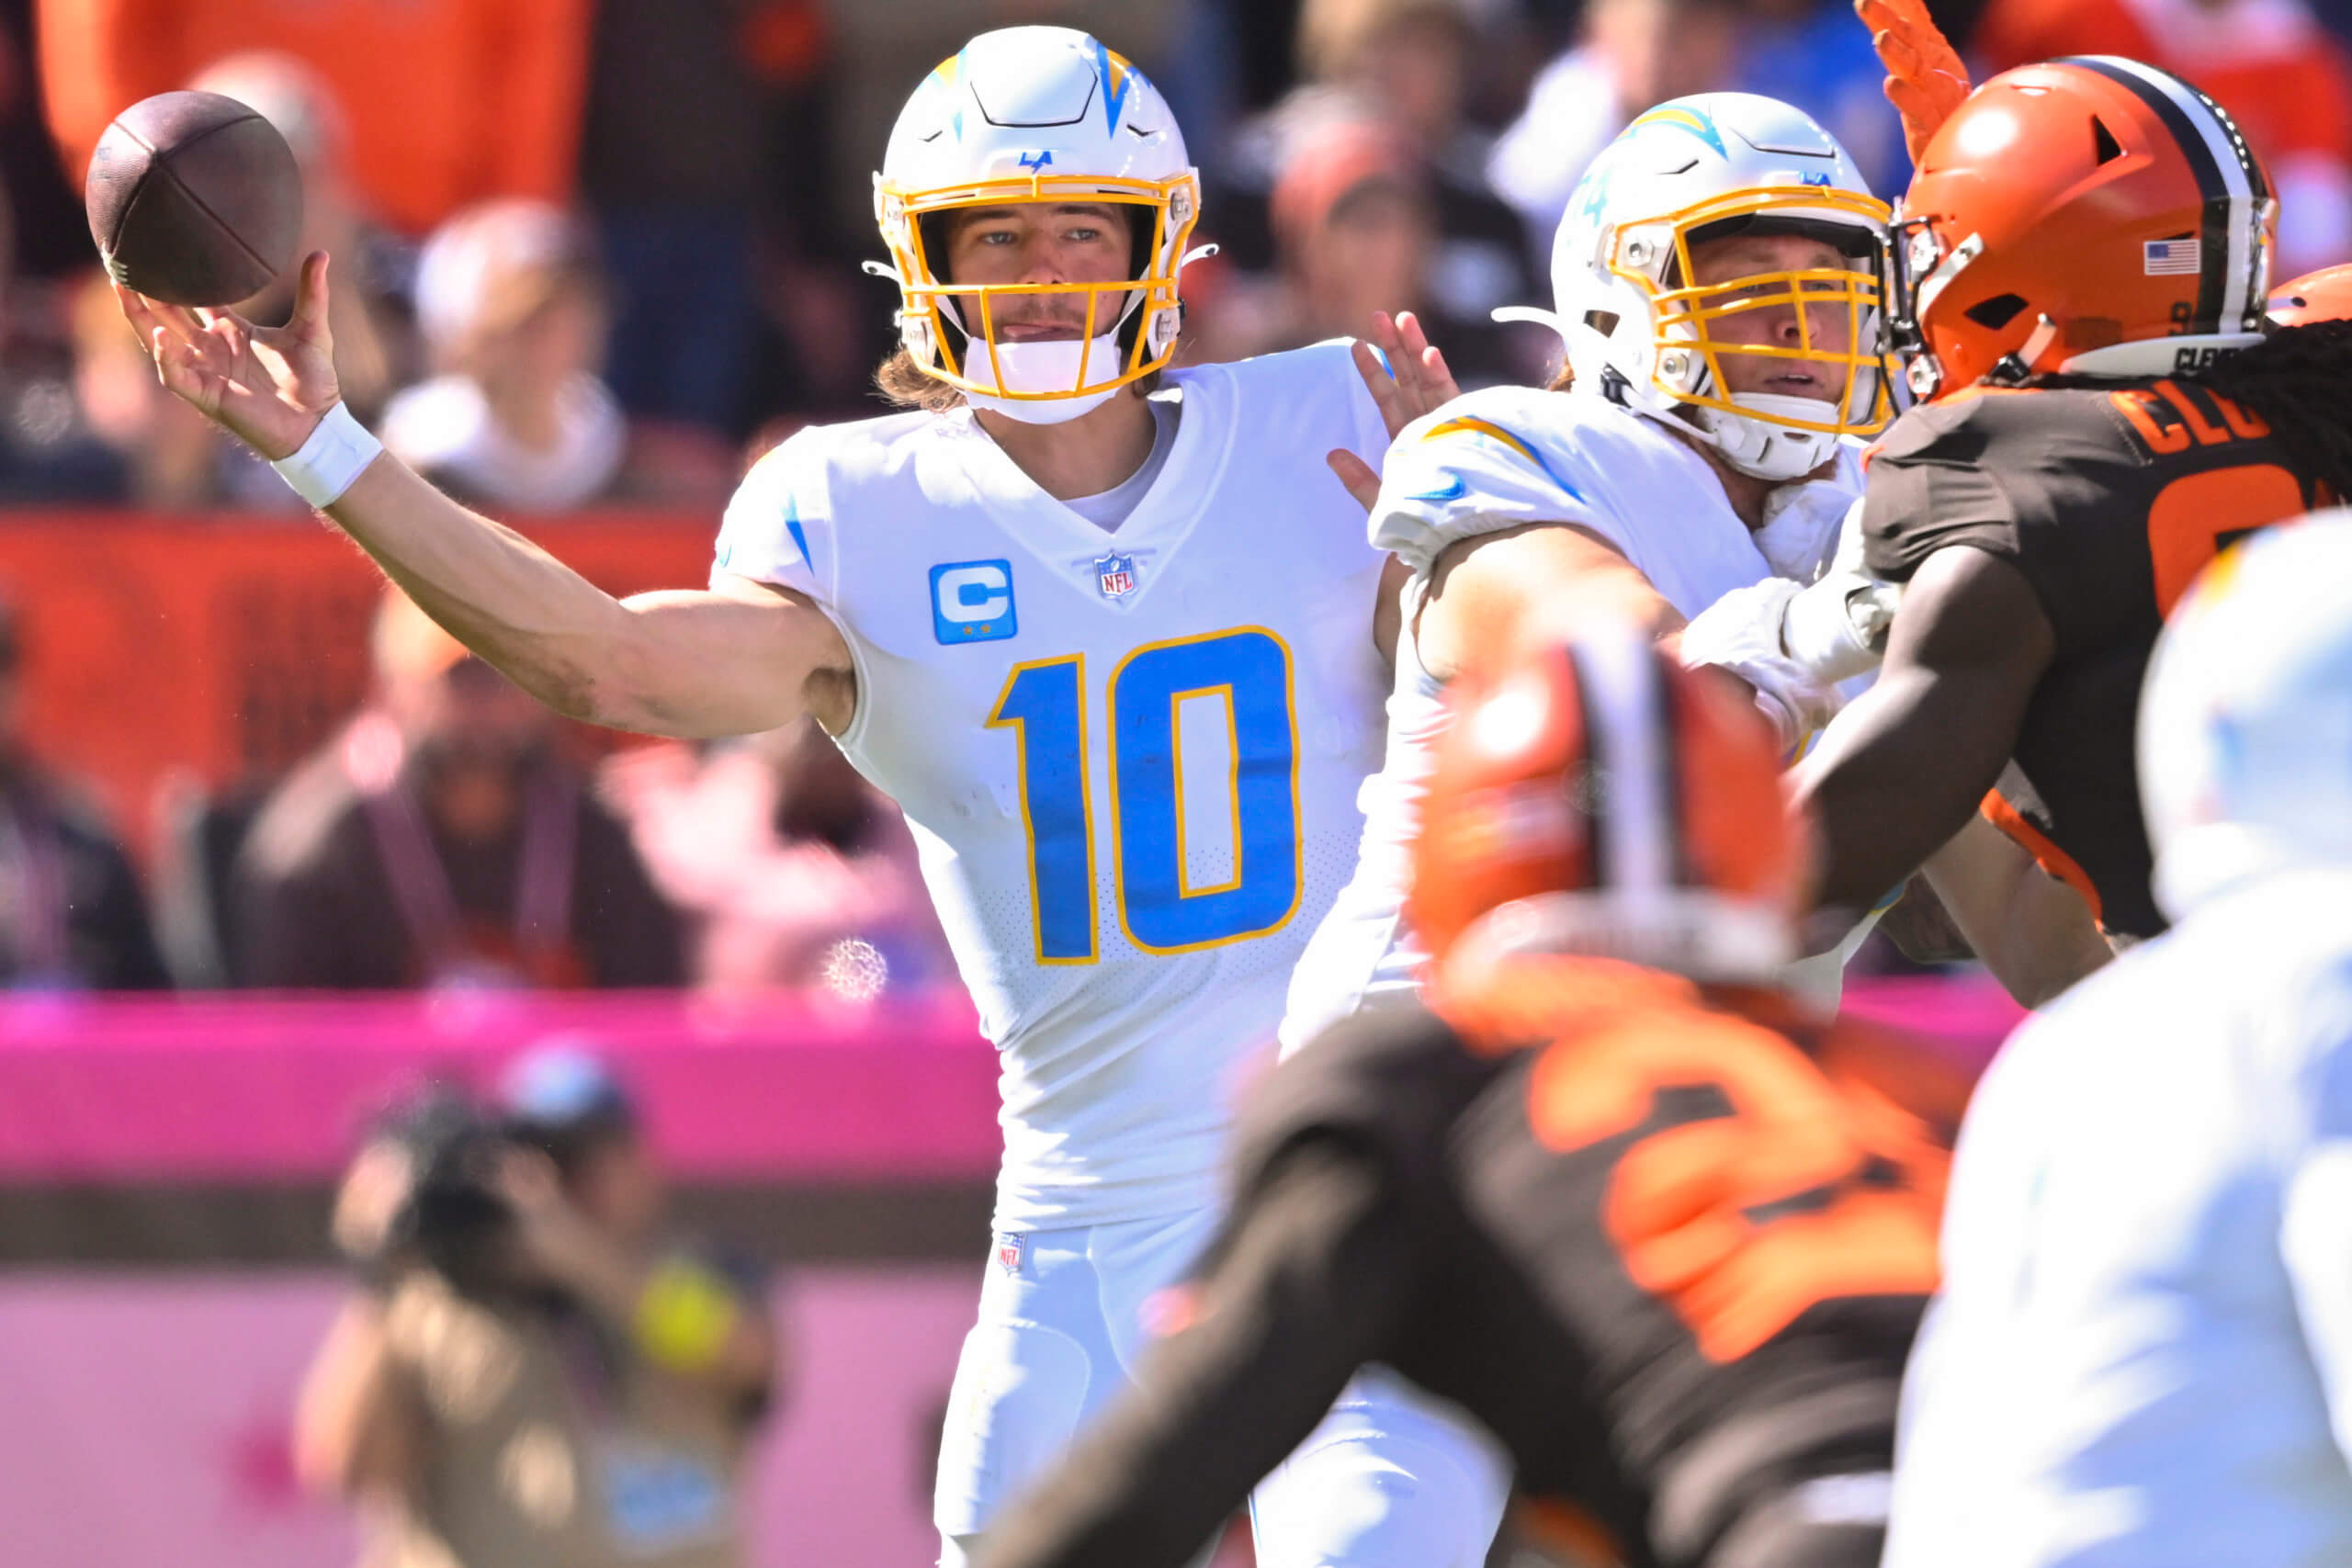 2020 NFL team previews: The Los Angeles Chargers are cursed with mediocrity  - Pride Of Detroit